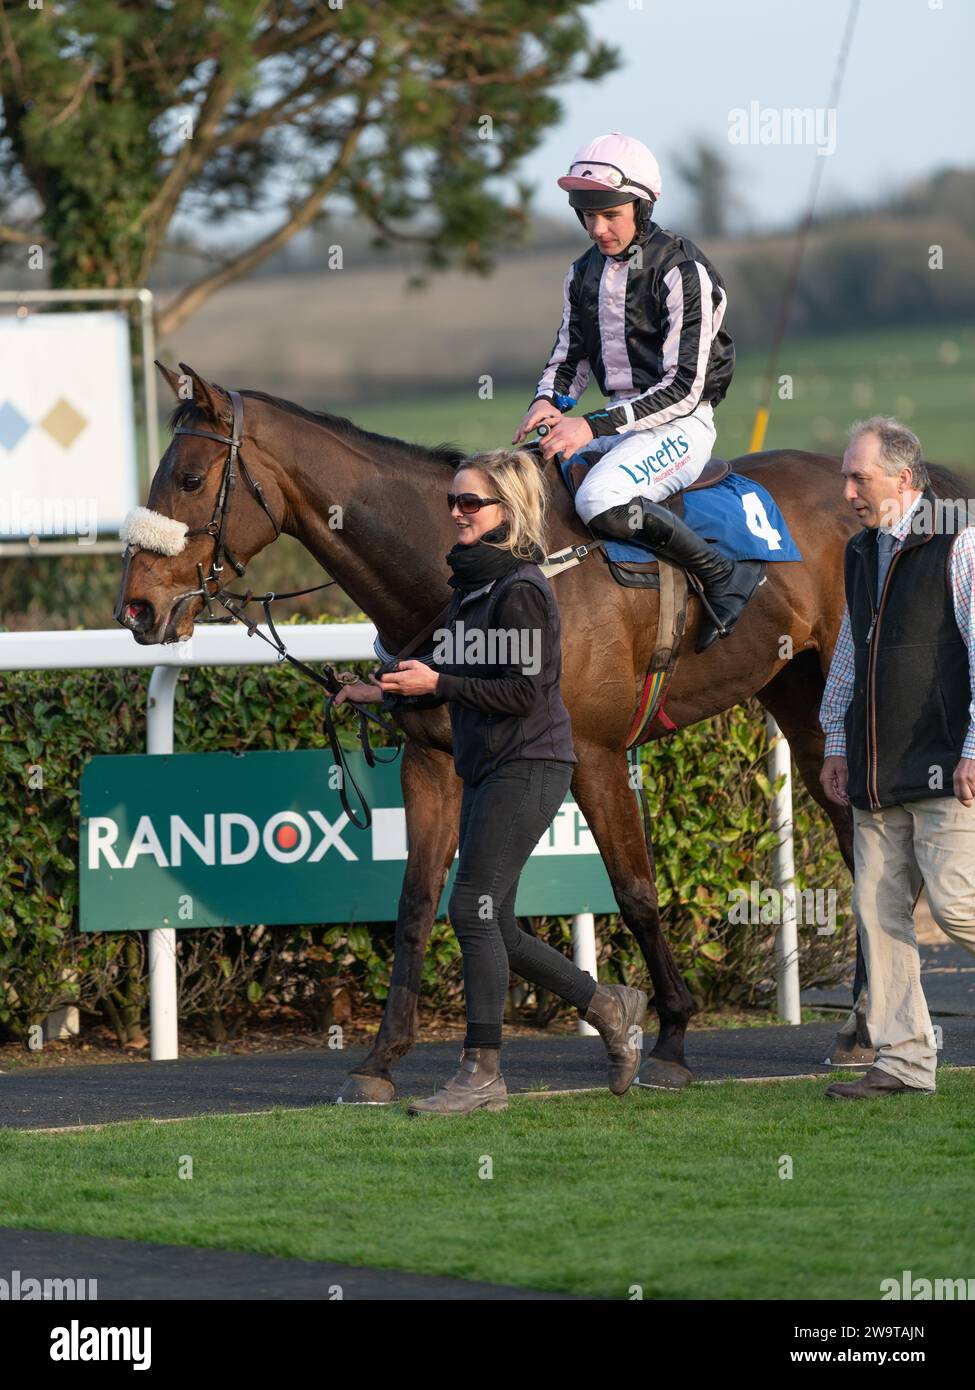 Lazy Sunday, ridden by Charlie Deutsch, trained by Richard Mitford-Slade, runs 4th in the handicap hurdle at Wincanton, March 21st 2022 Stock Photo